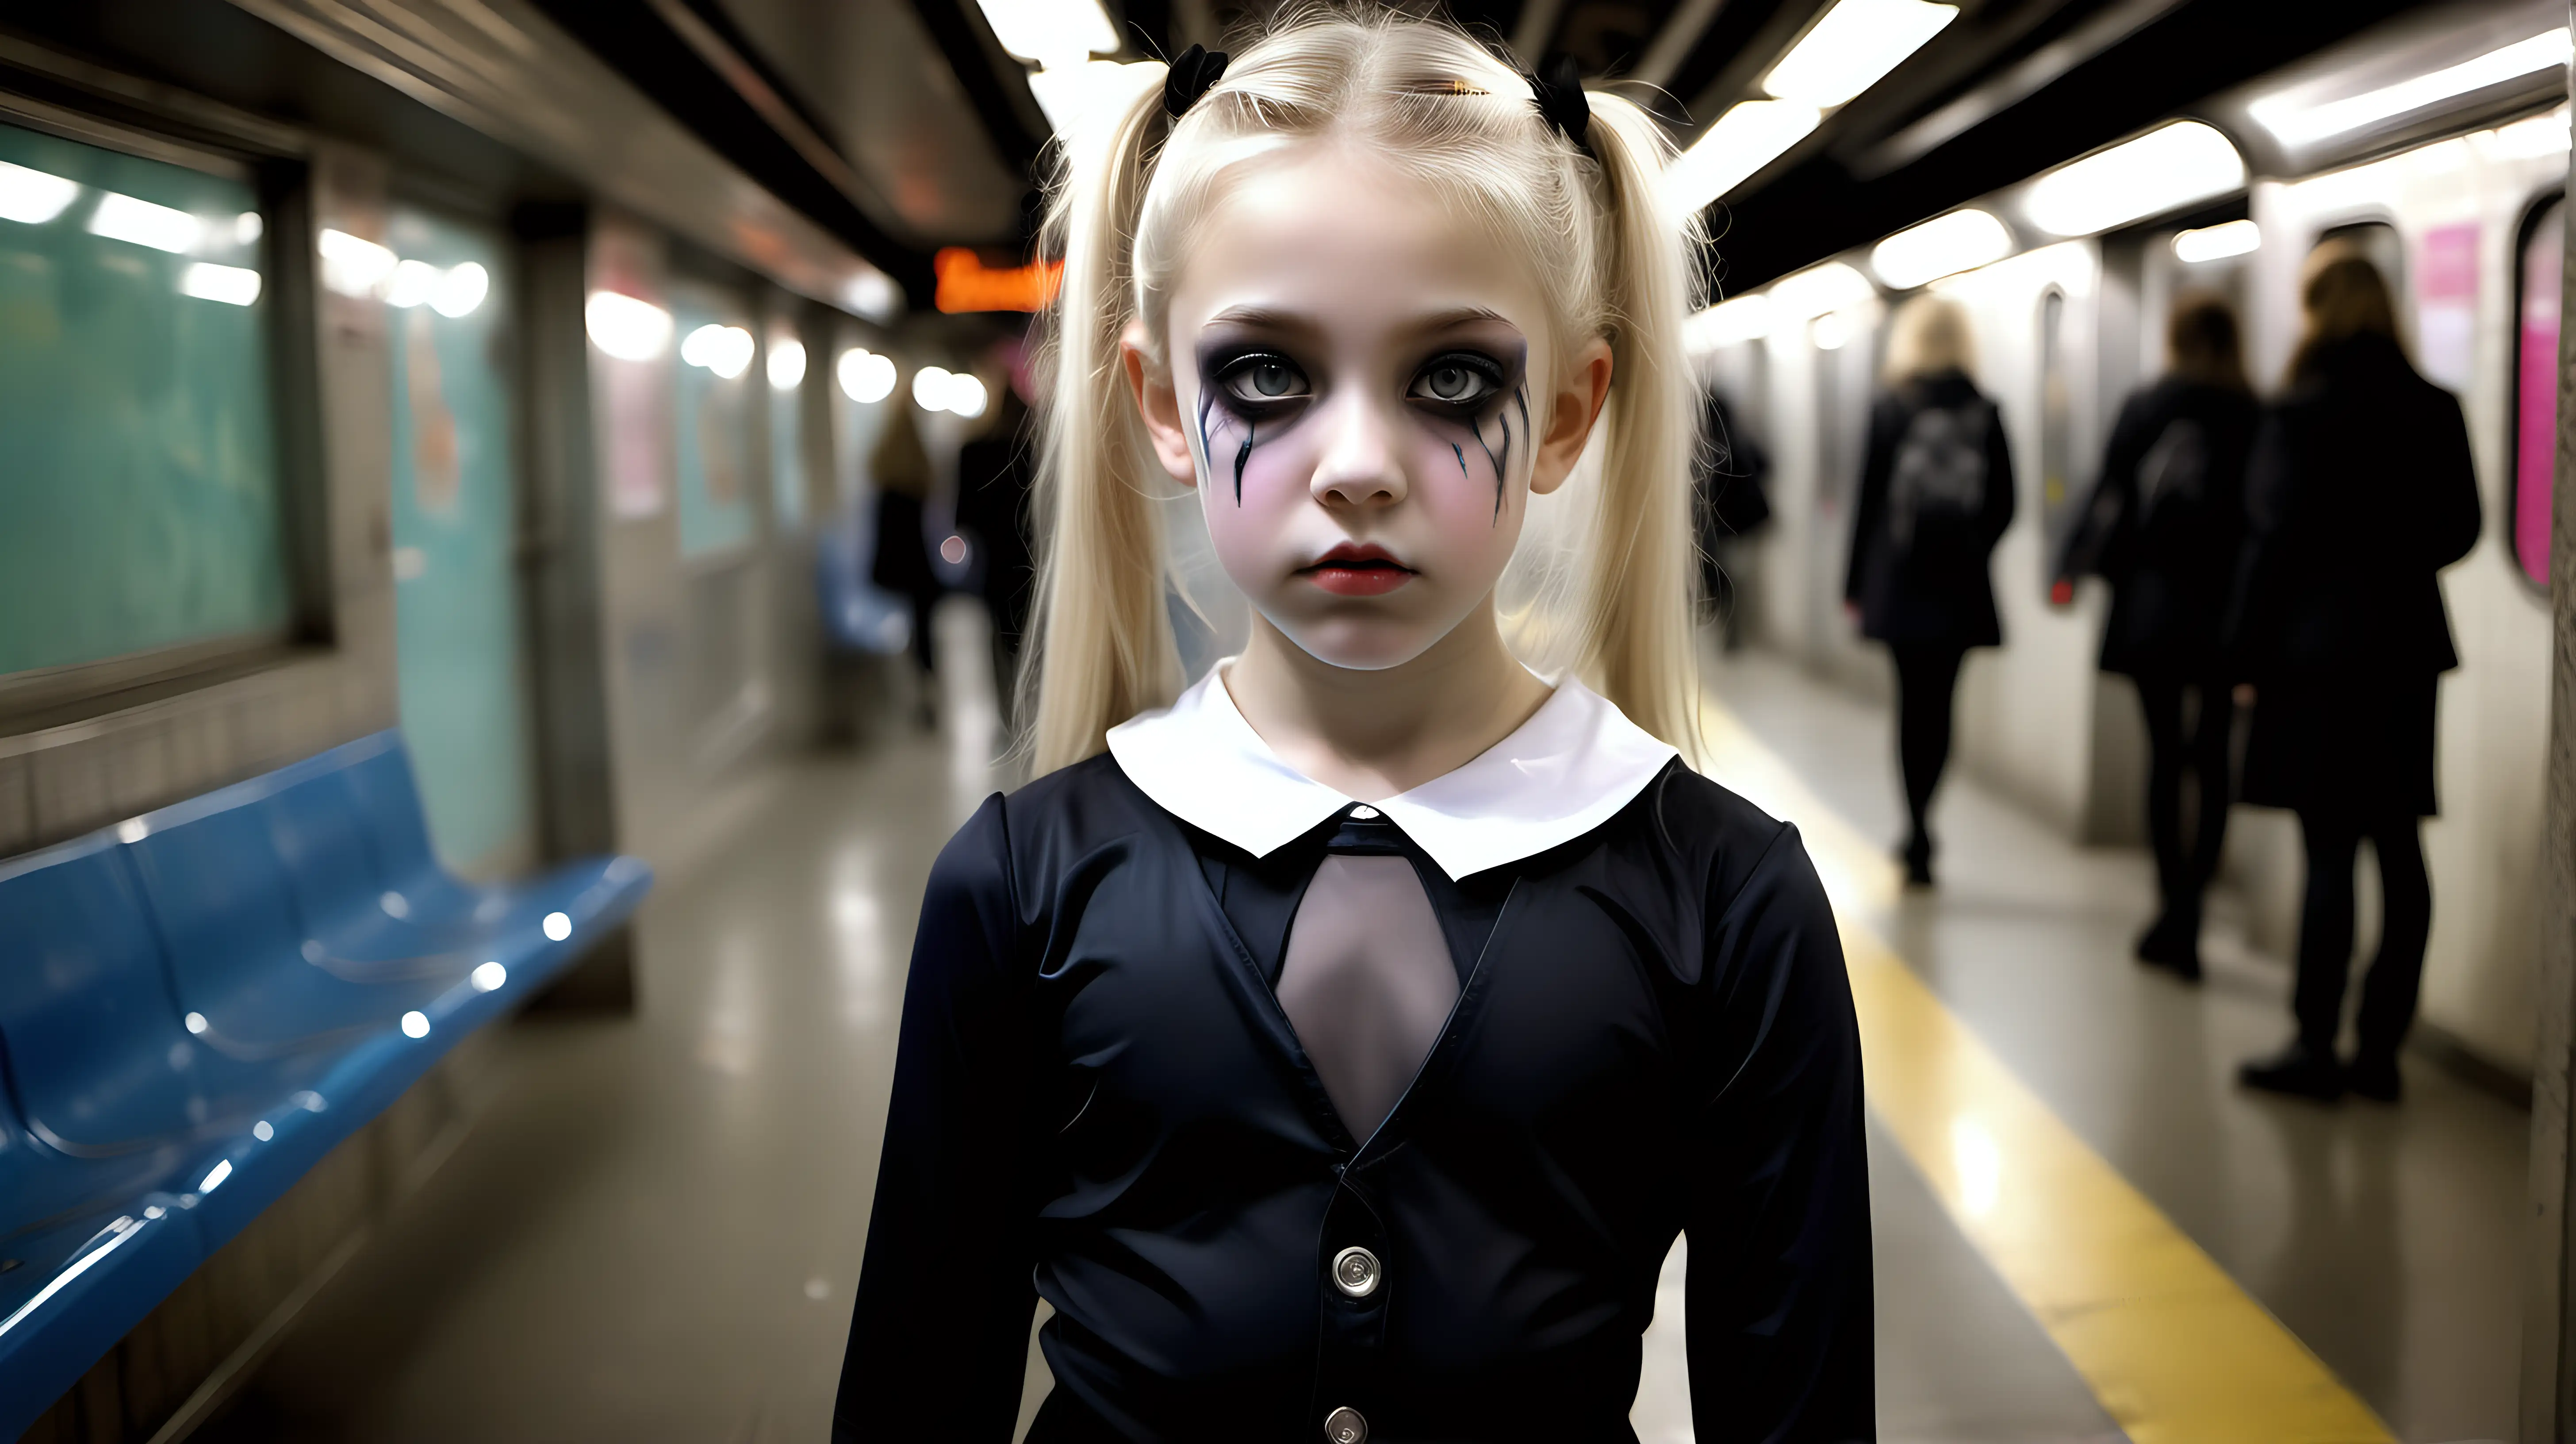 Gothic Little Girl with Mom in Neonlit Subway Corridors High Fashion Portrait